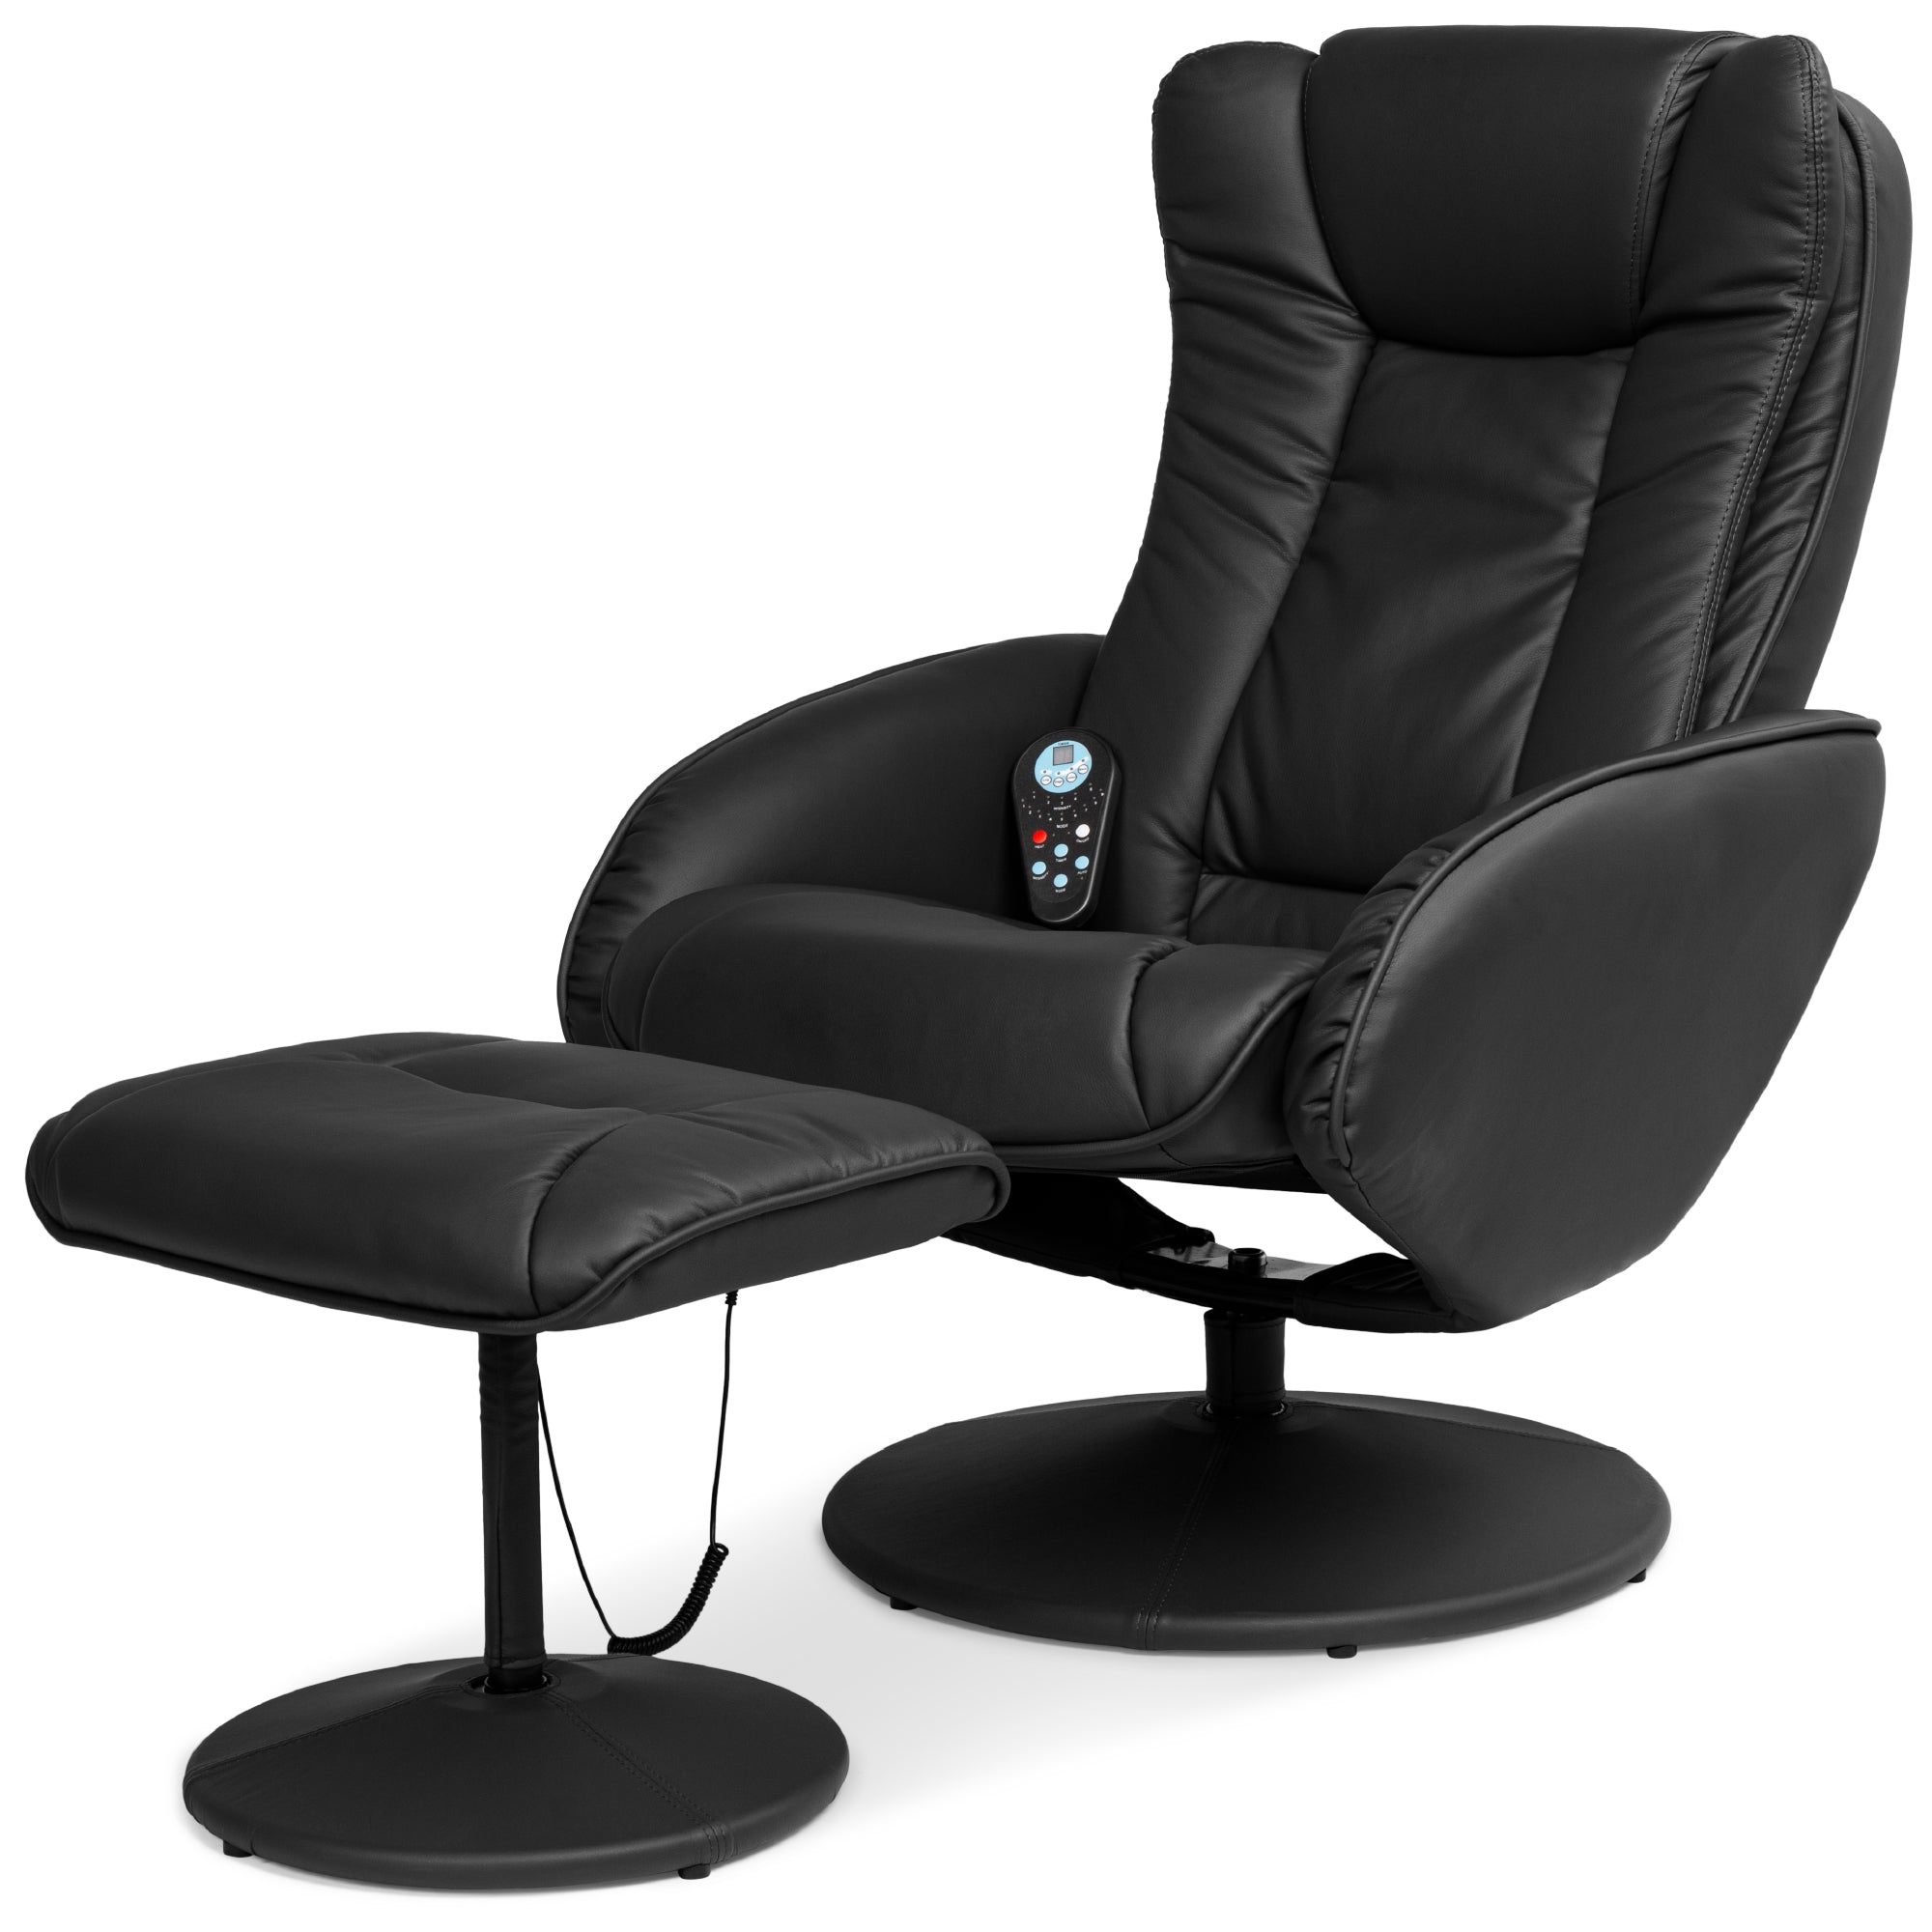 Manual reclining foot rest business leather computer chair